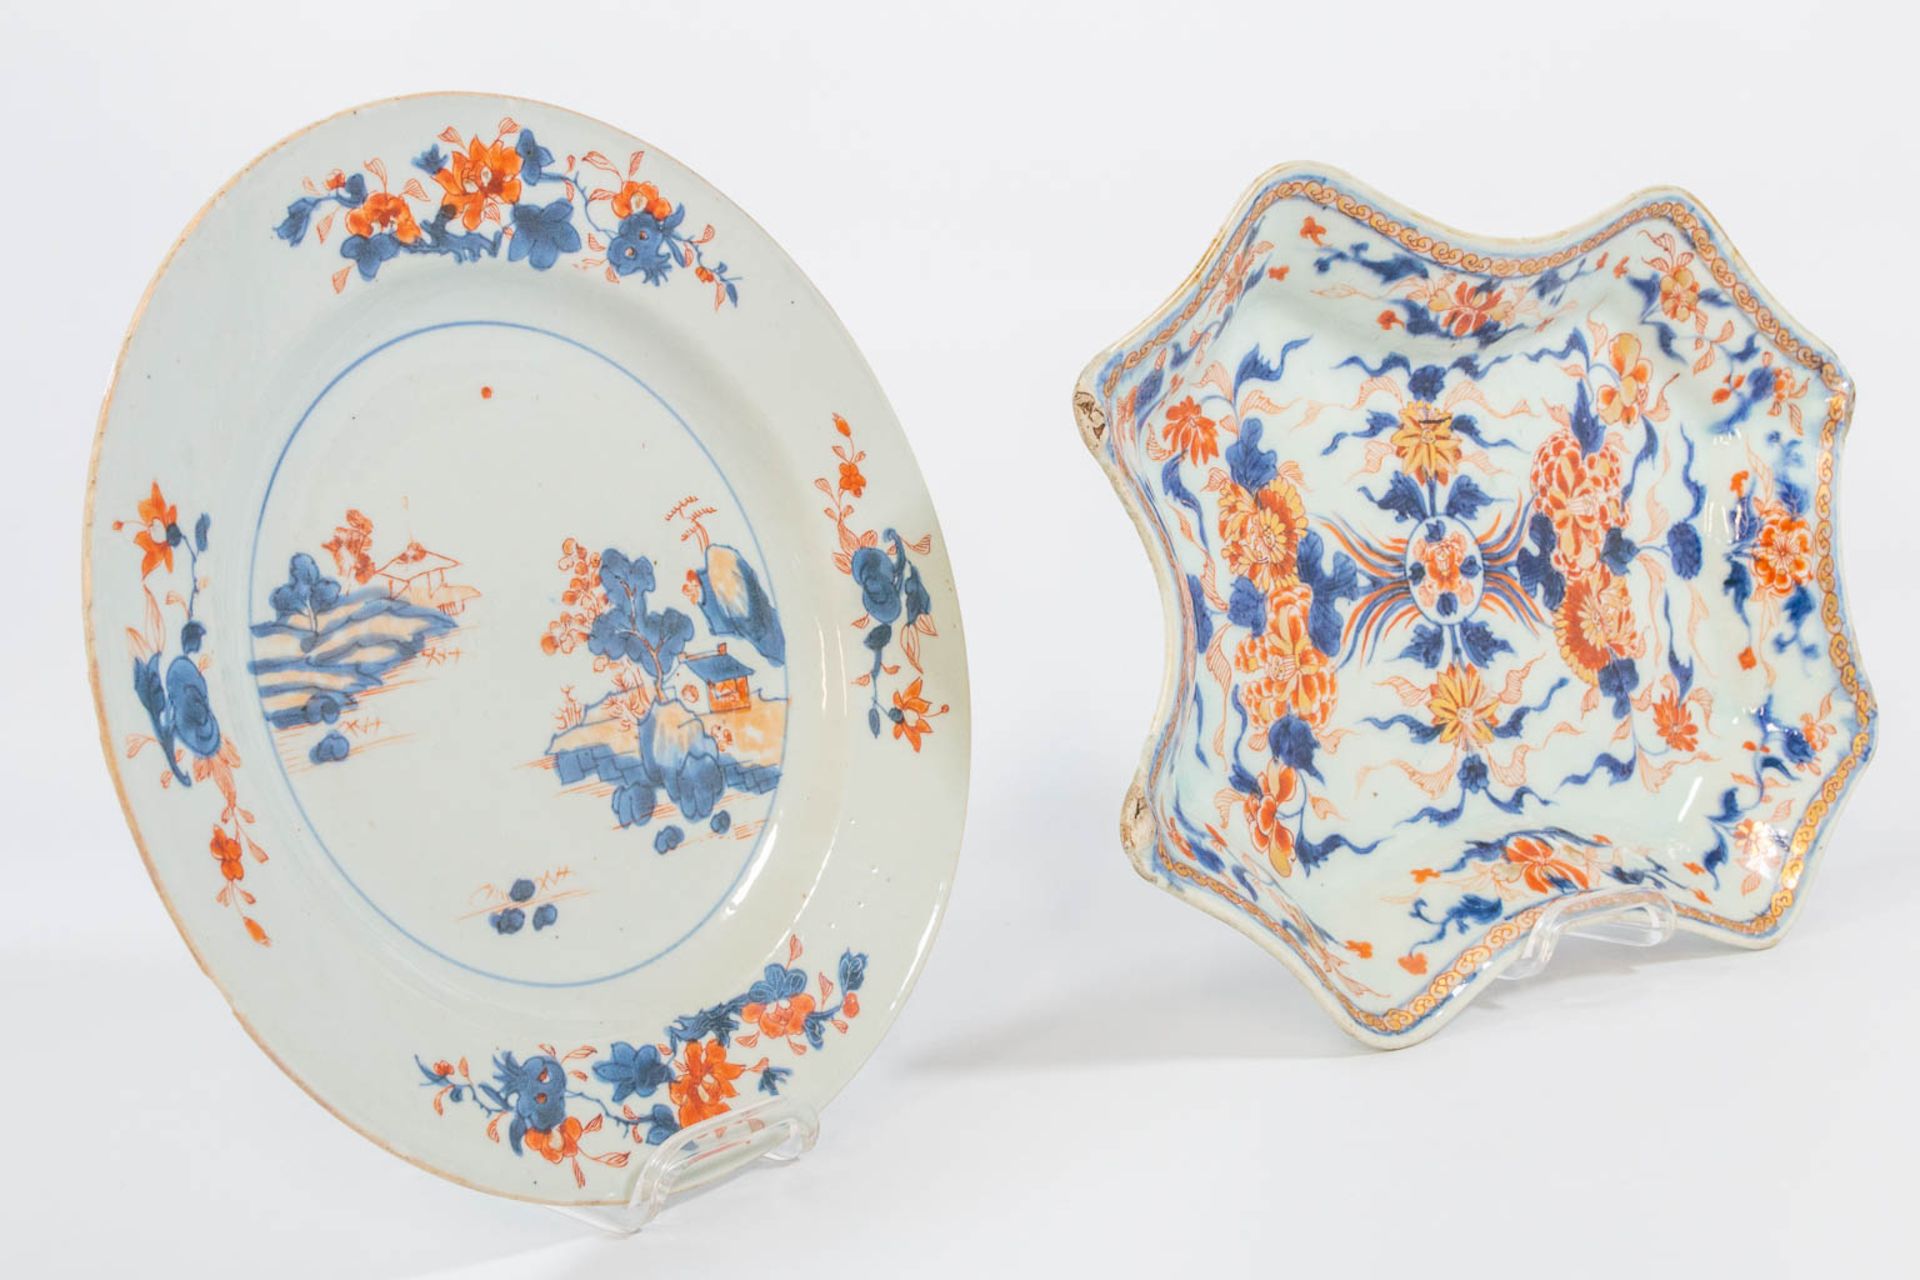 A collection of 6 famille rose objects and plates, made of porcelain. - Image 16 of 24